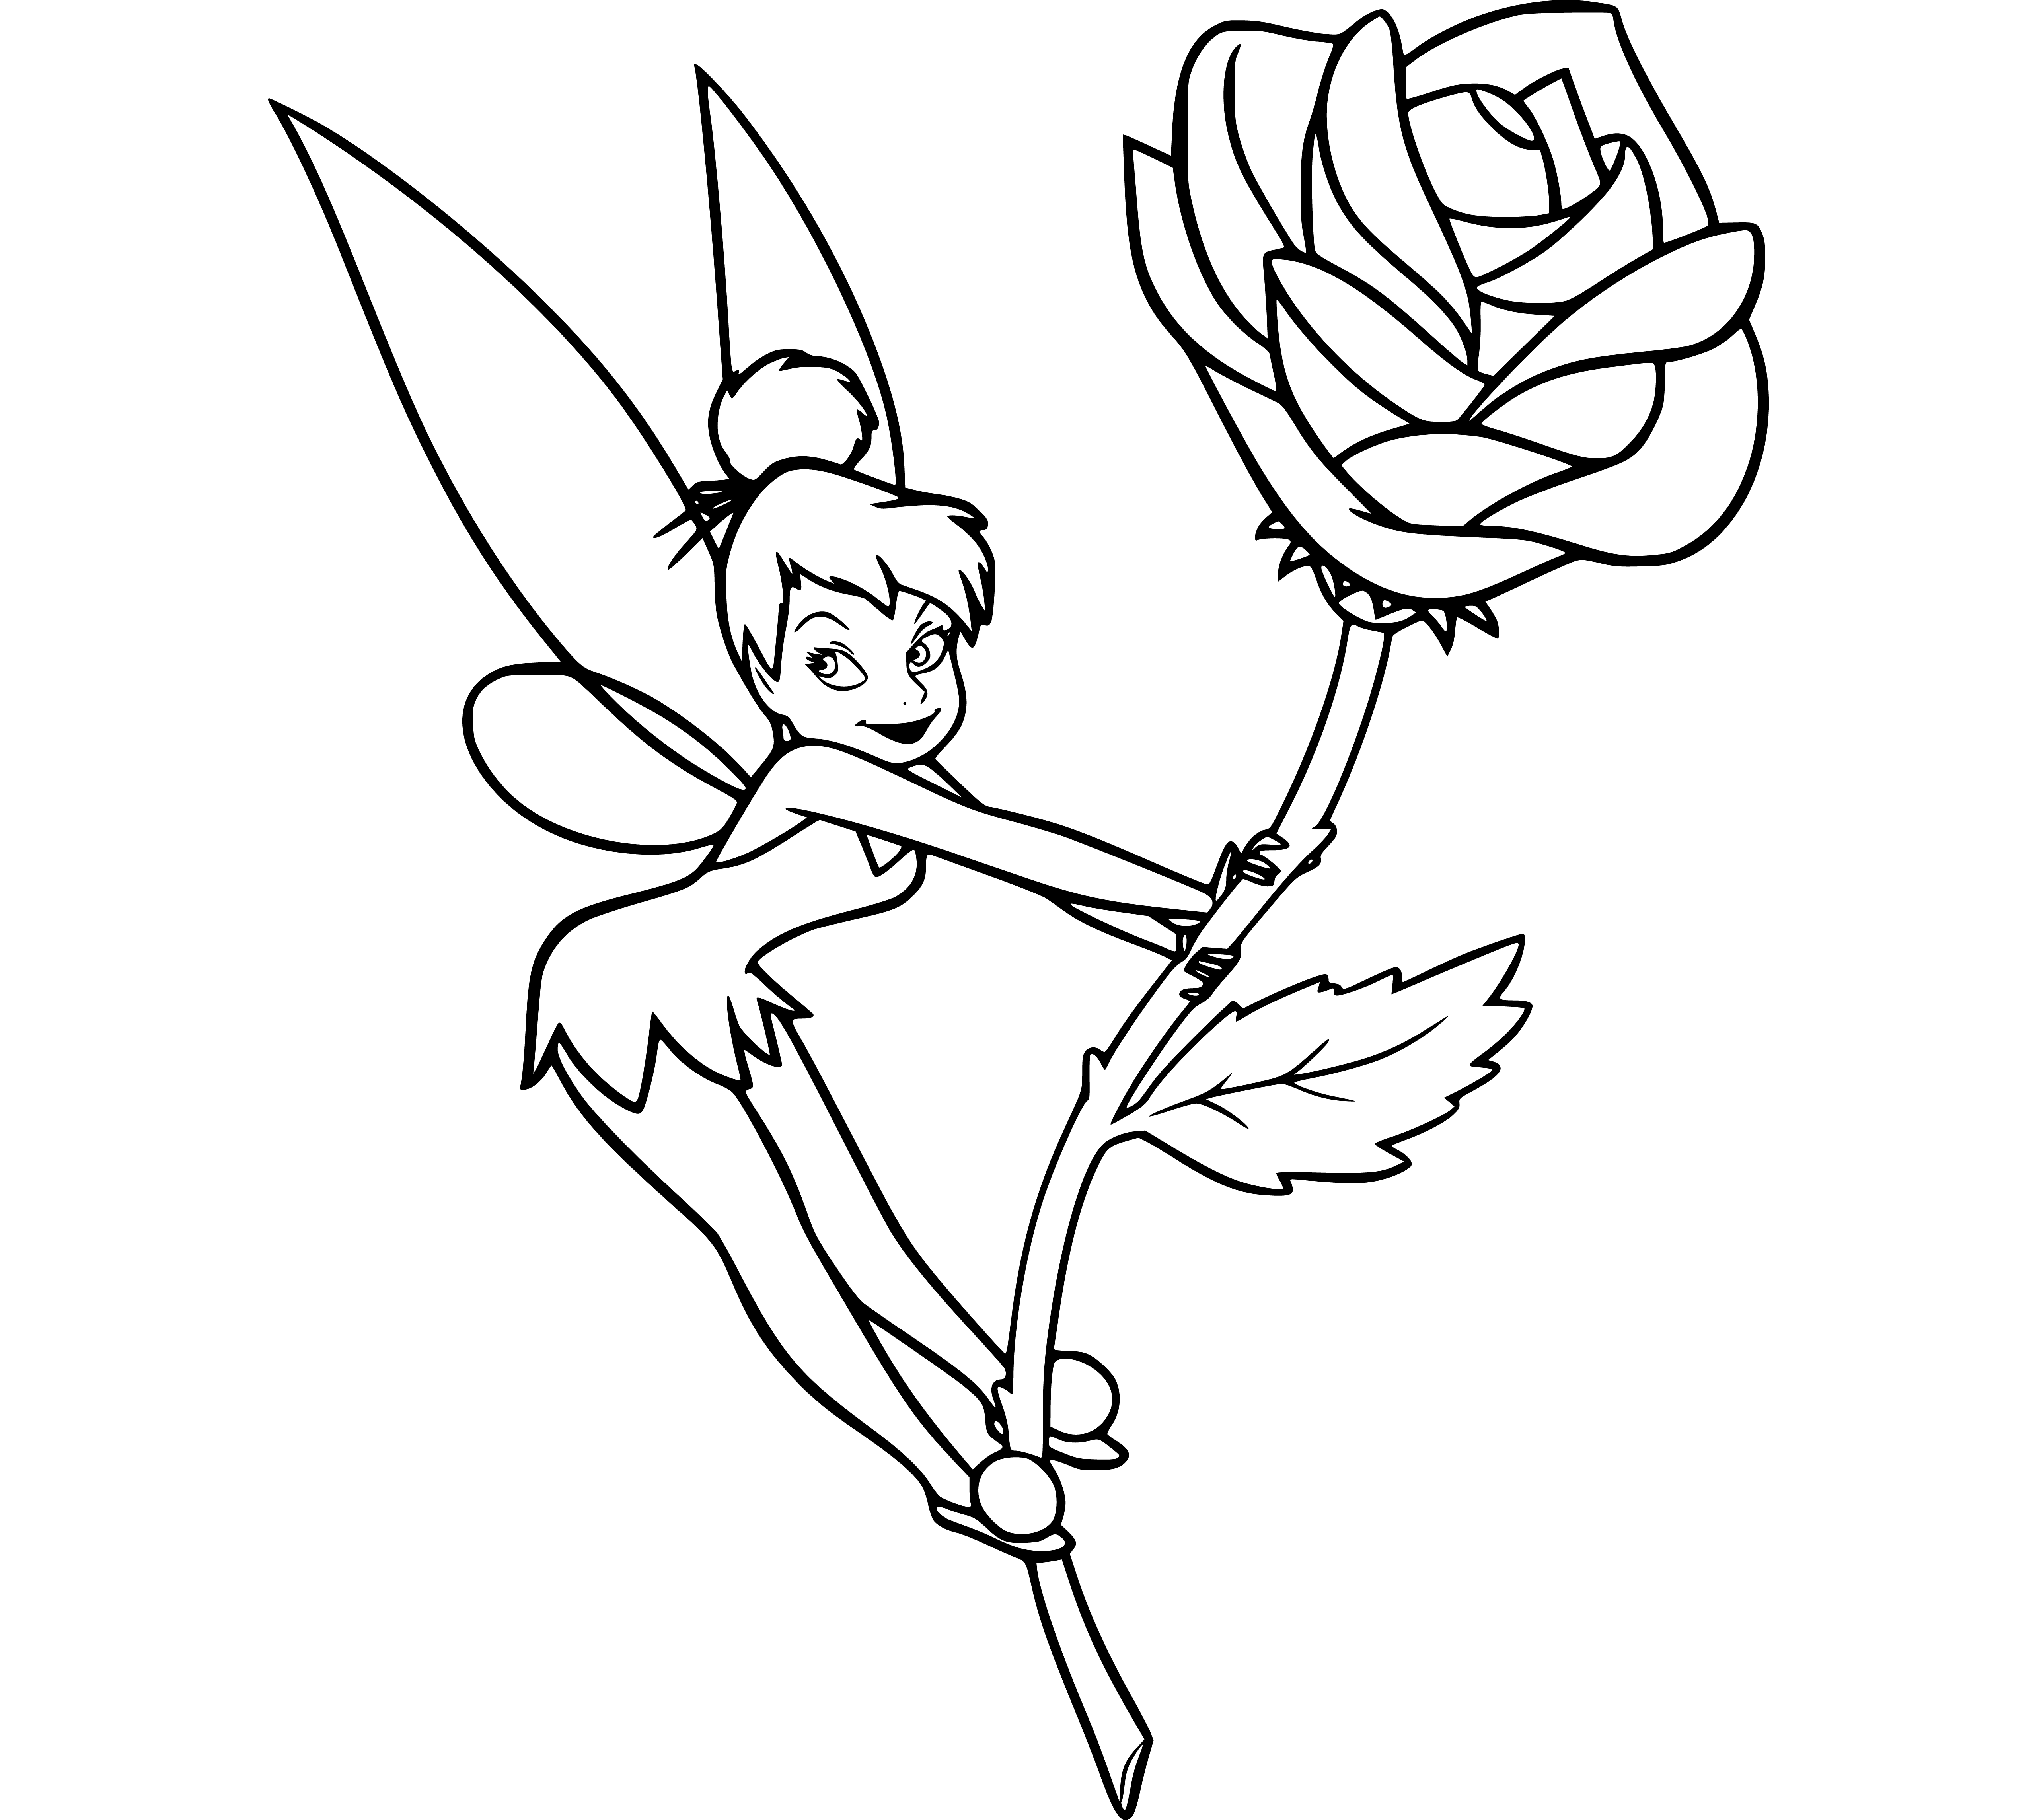 Tinker Bell holding a rose Coloring Pages - SheetalColor.com